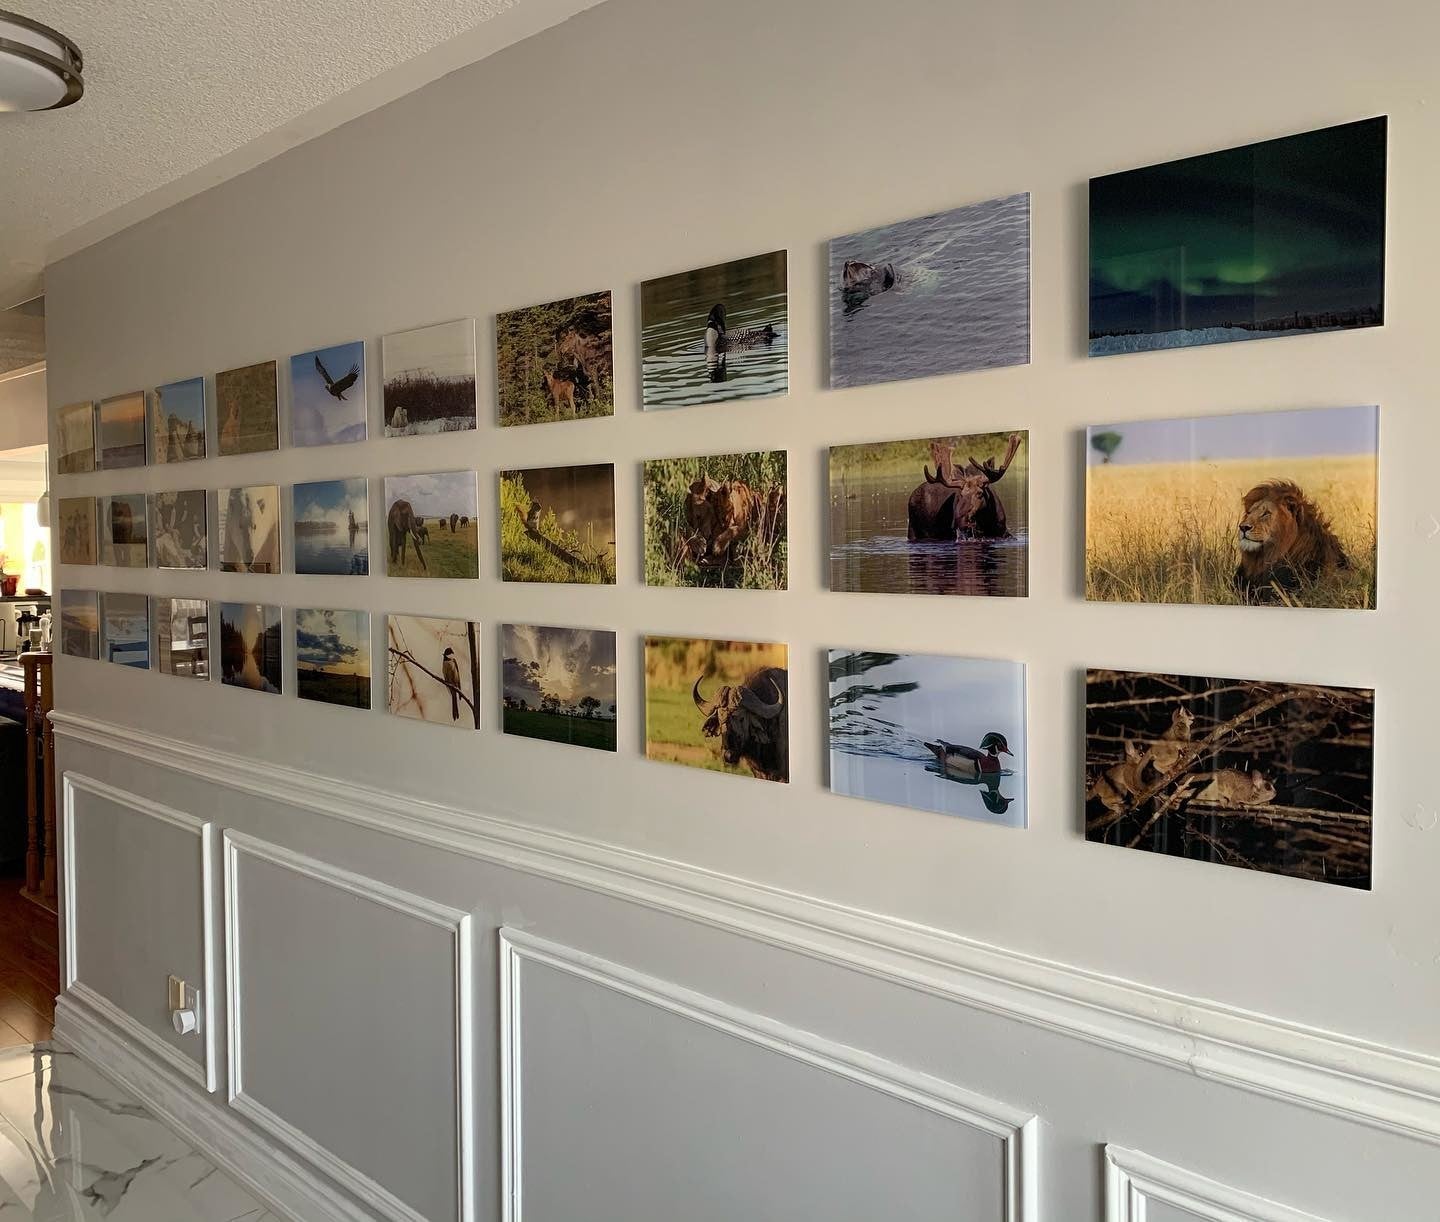 Gallery Wall of Acrylic Prints - Photo by Posterjack Canada Customer